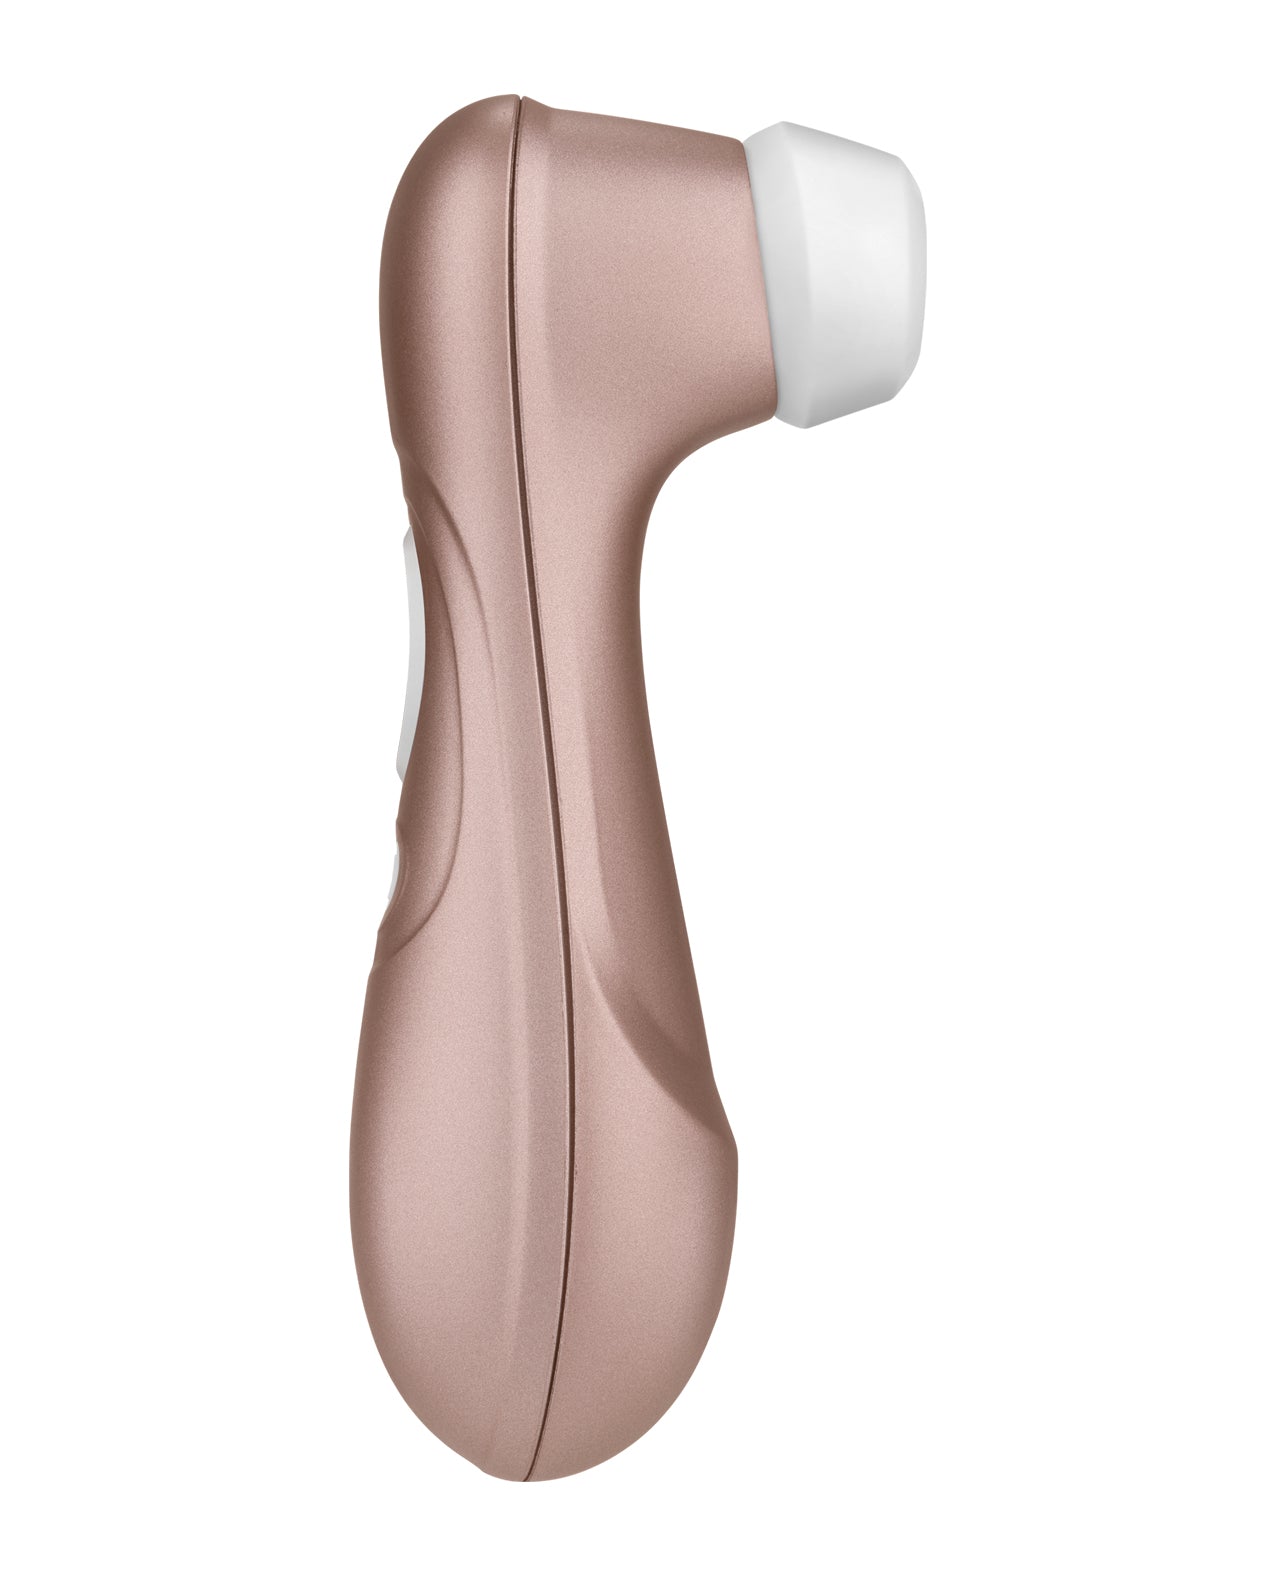 Satisfyer Pro 2 NG Rechargeable Pressure Wave Vibrator